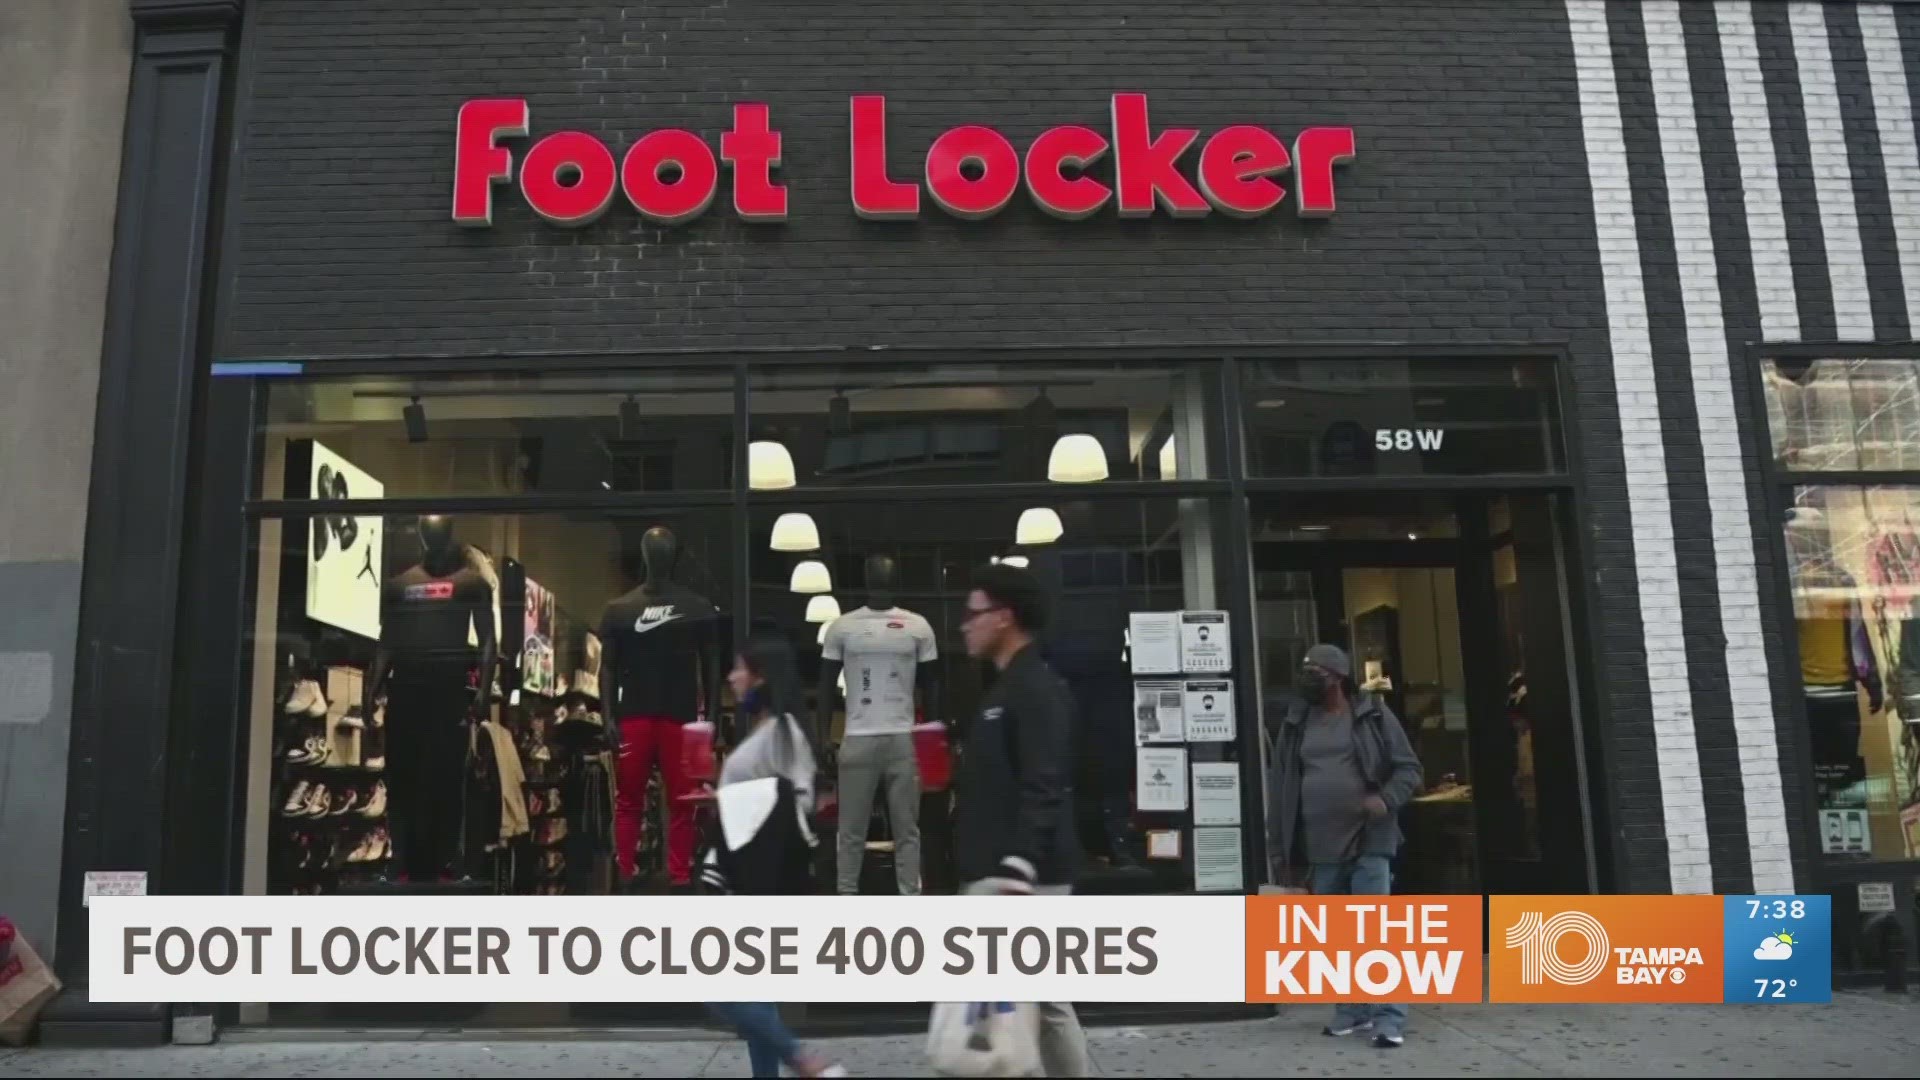 The company says it is planning to open new concept stores targeting younger generations.